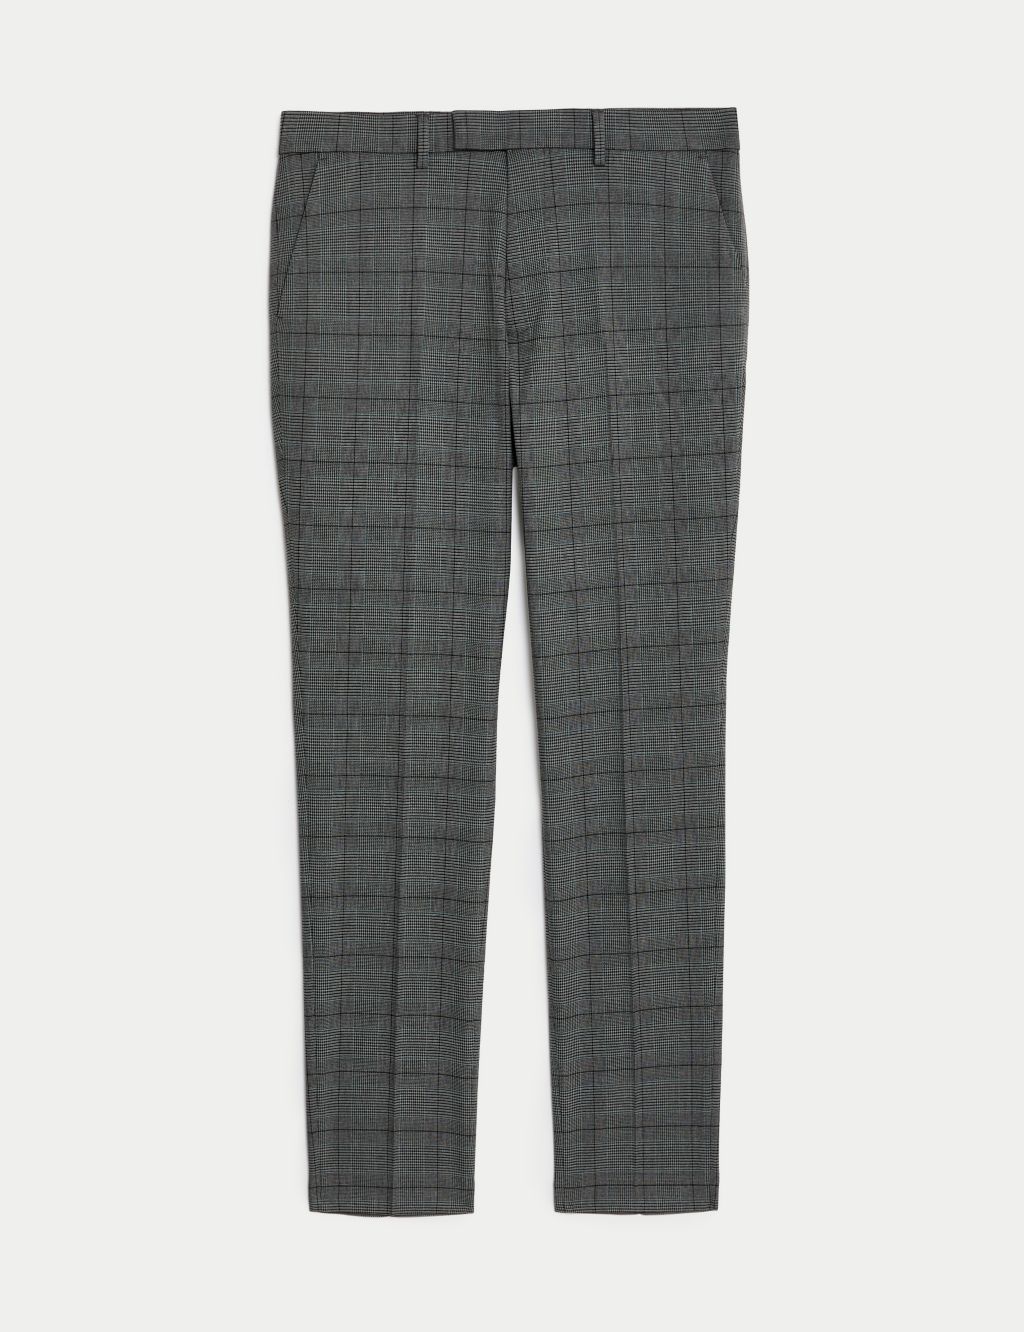 Skinny Fit Prince of Wales Check Suit Trousers image 2